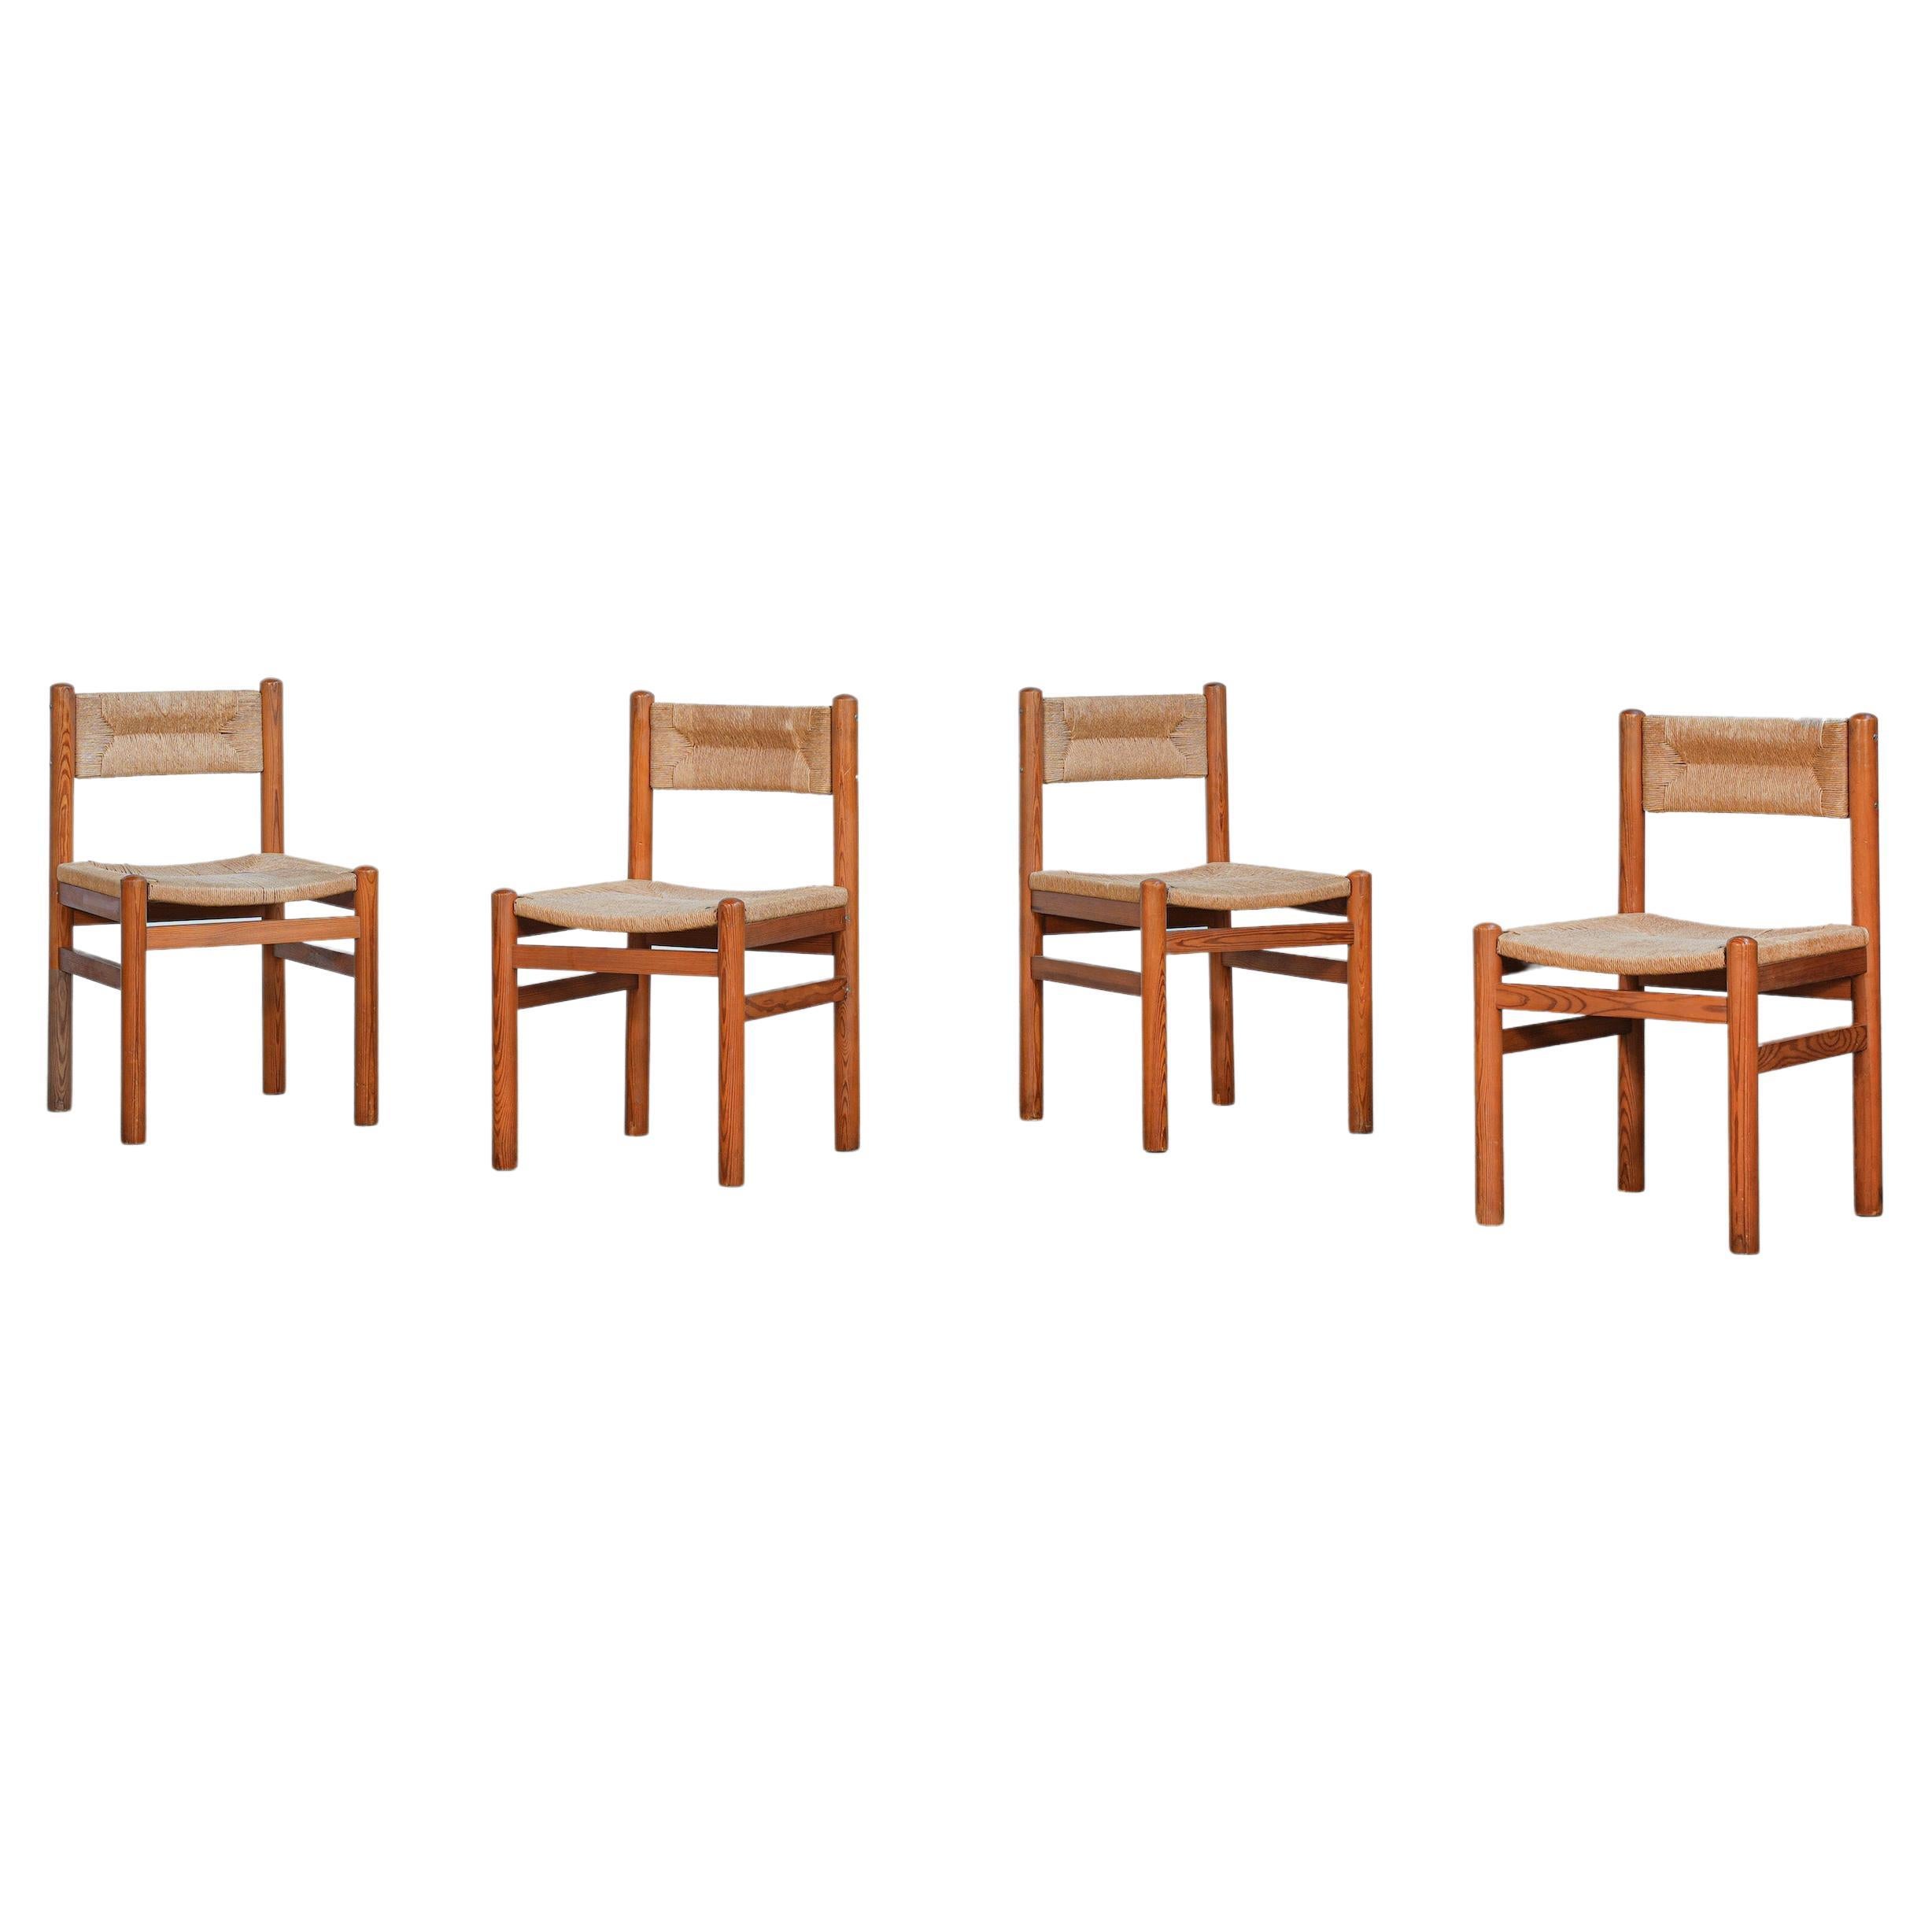 Rare Set of Four Danish Pine Chairs in the Style of Charlotte Perriand, 1960ies For Sale